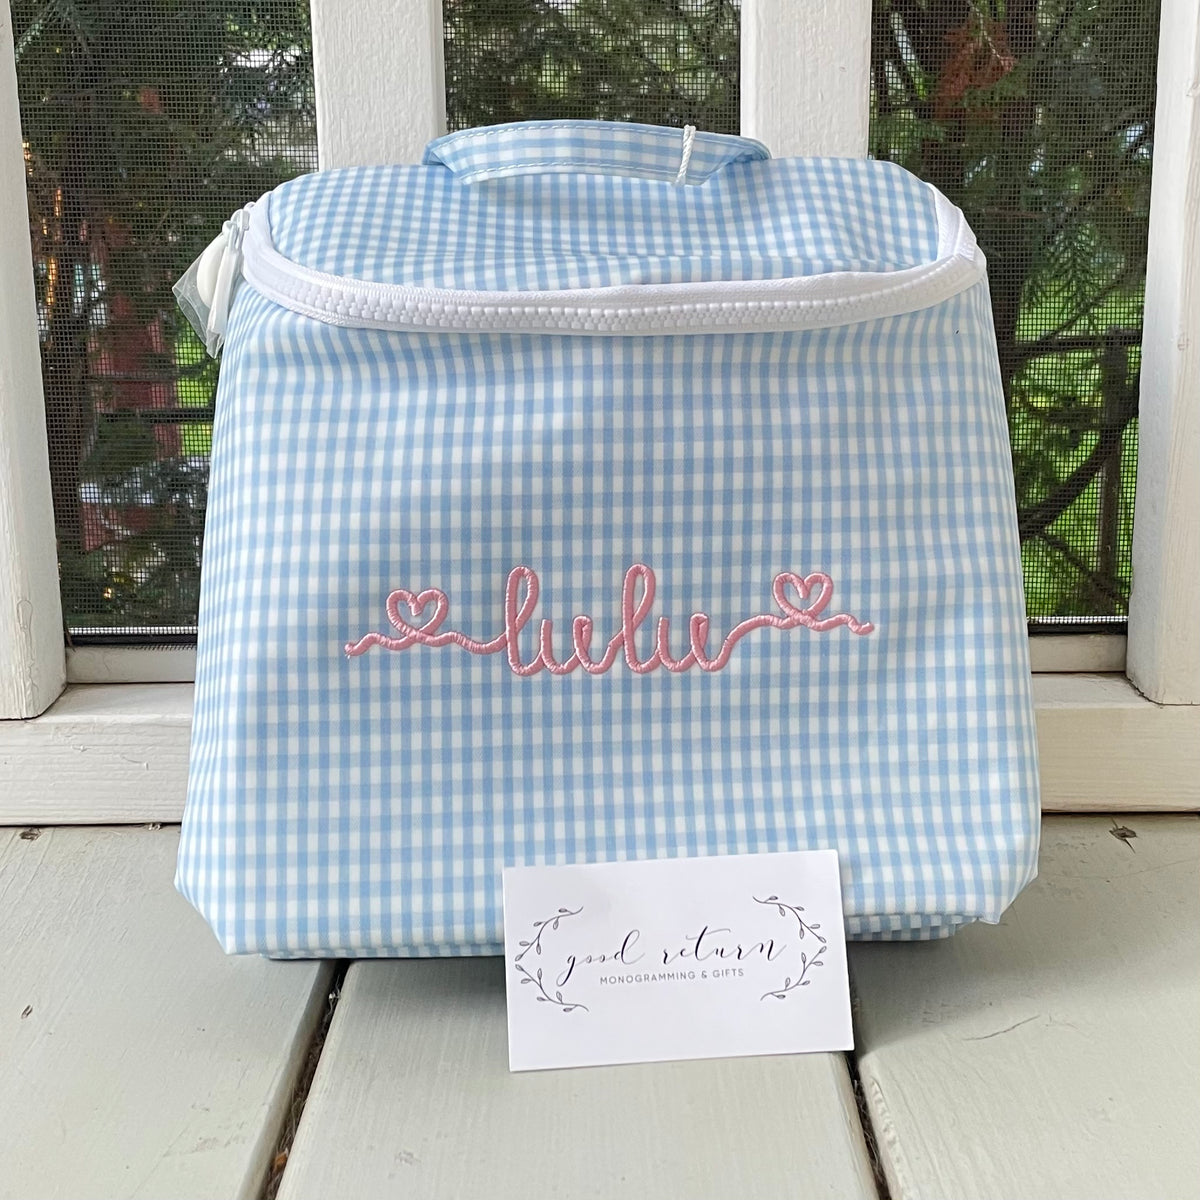 Take Away Insulated Bag - Gingham Mist - ElleB gifts